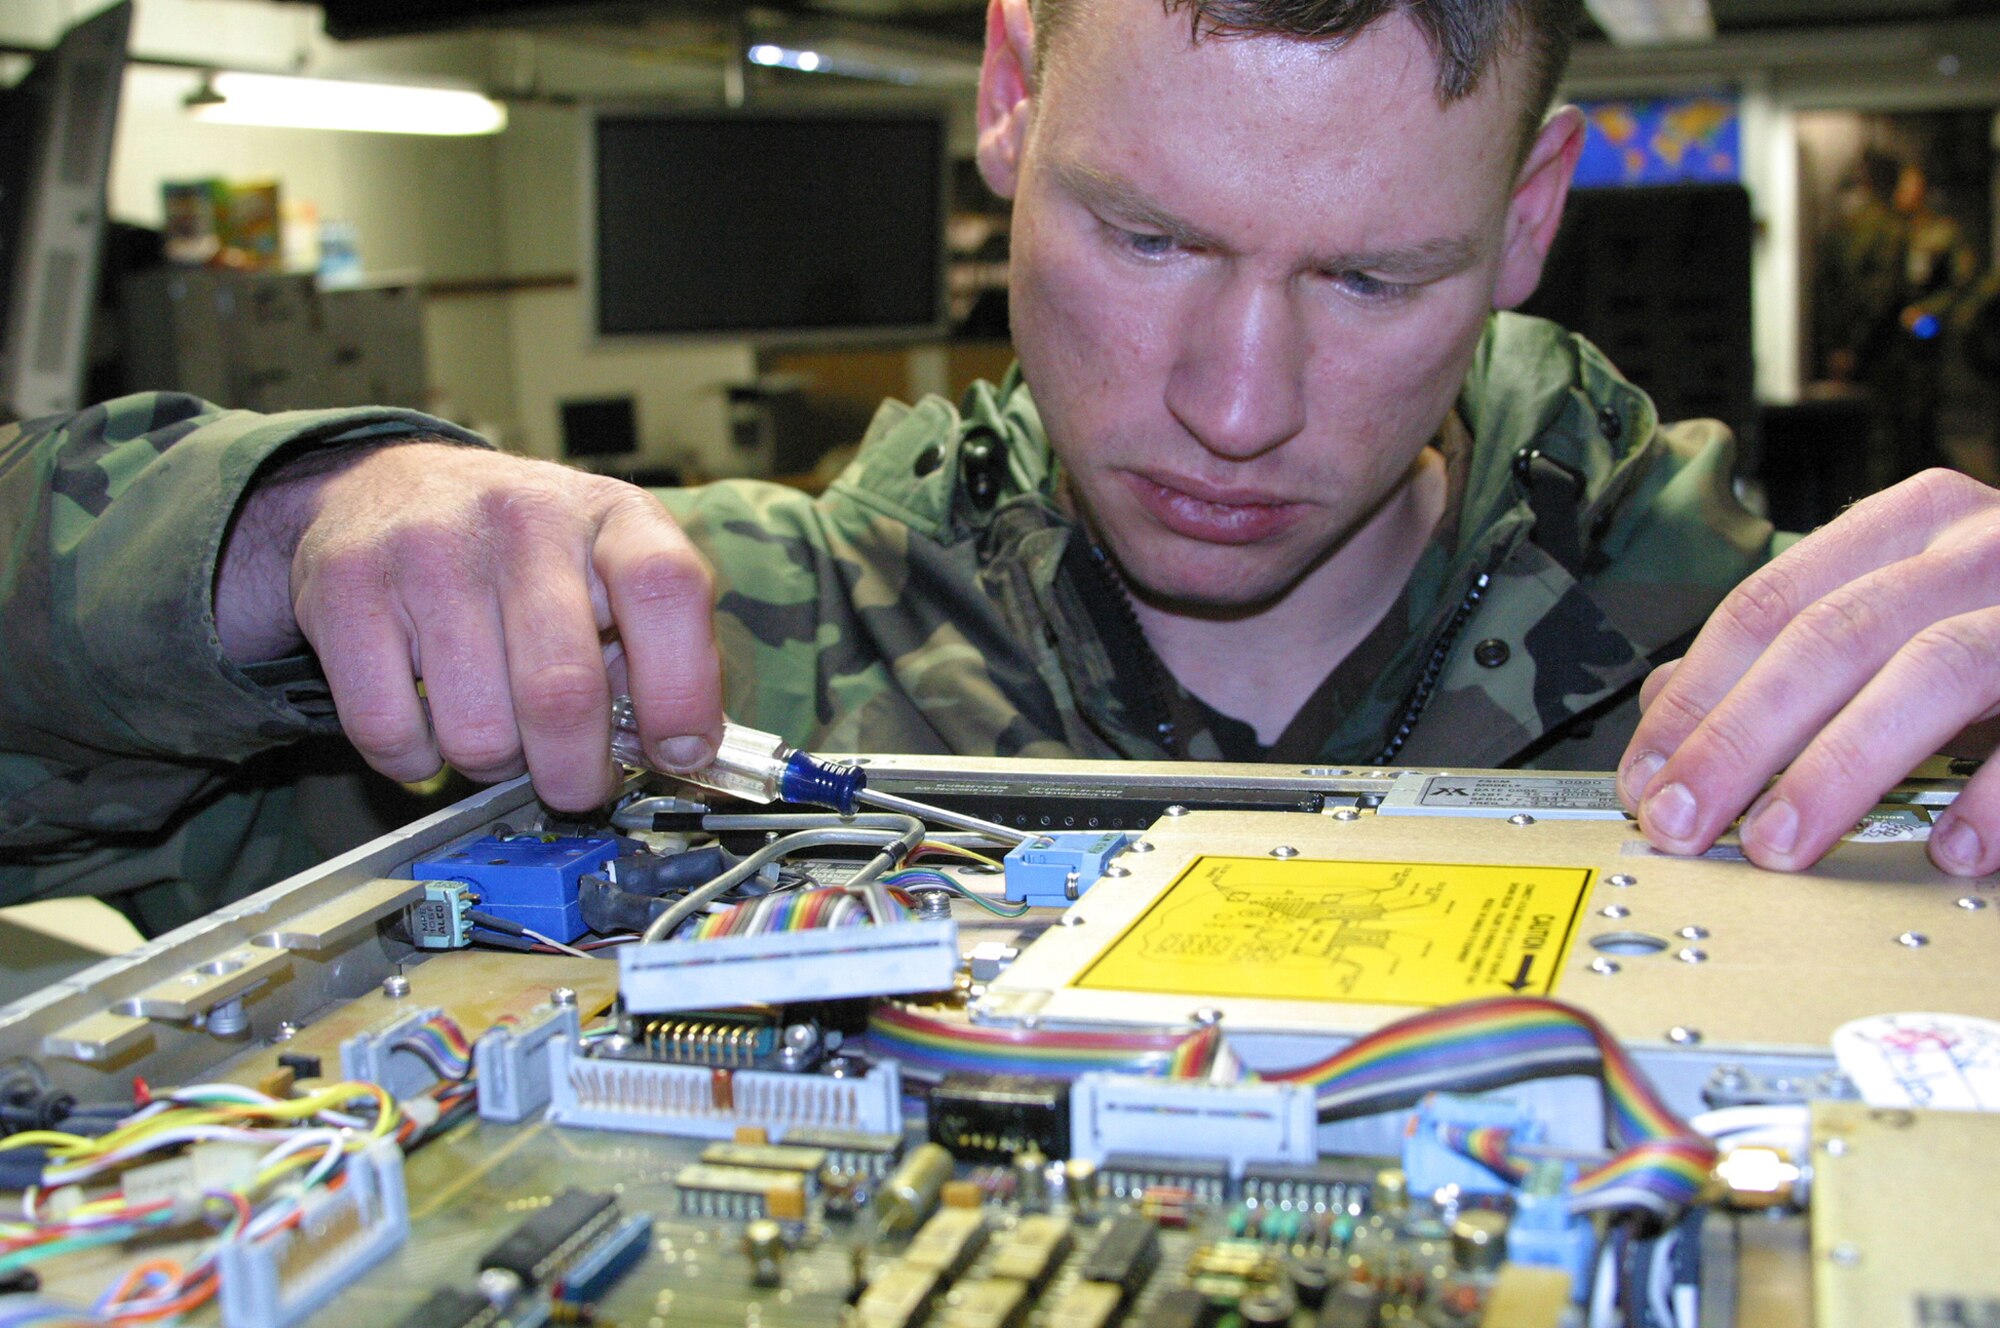 ROYAL AIR FORCE CROUGHTON, England (USAFENS) -- Staff Sgt. Doug Styers, 422nd Communications Squadron Satellite Communications crew chief, troubleshoots the IF Assembly in an Upconverter for the Air Force's first NATO satellite contoller mission. (Photo by Staff Sgt. Chris Stagner)